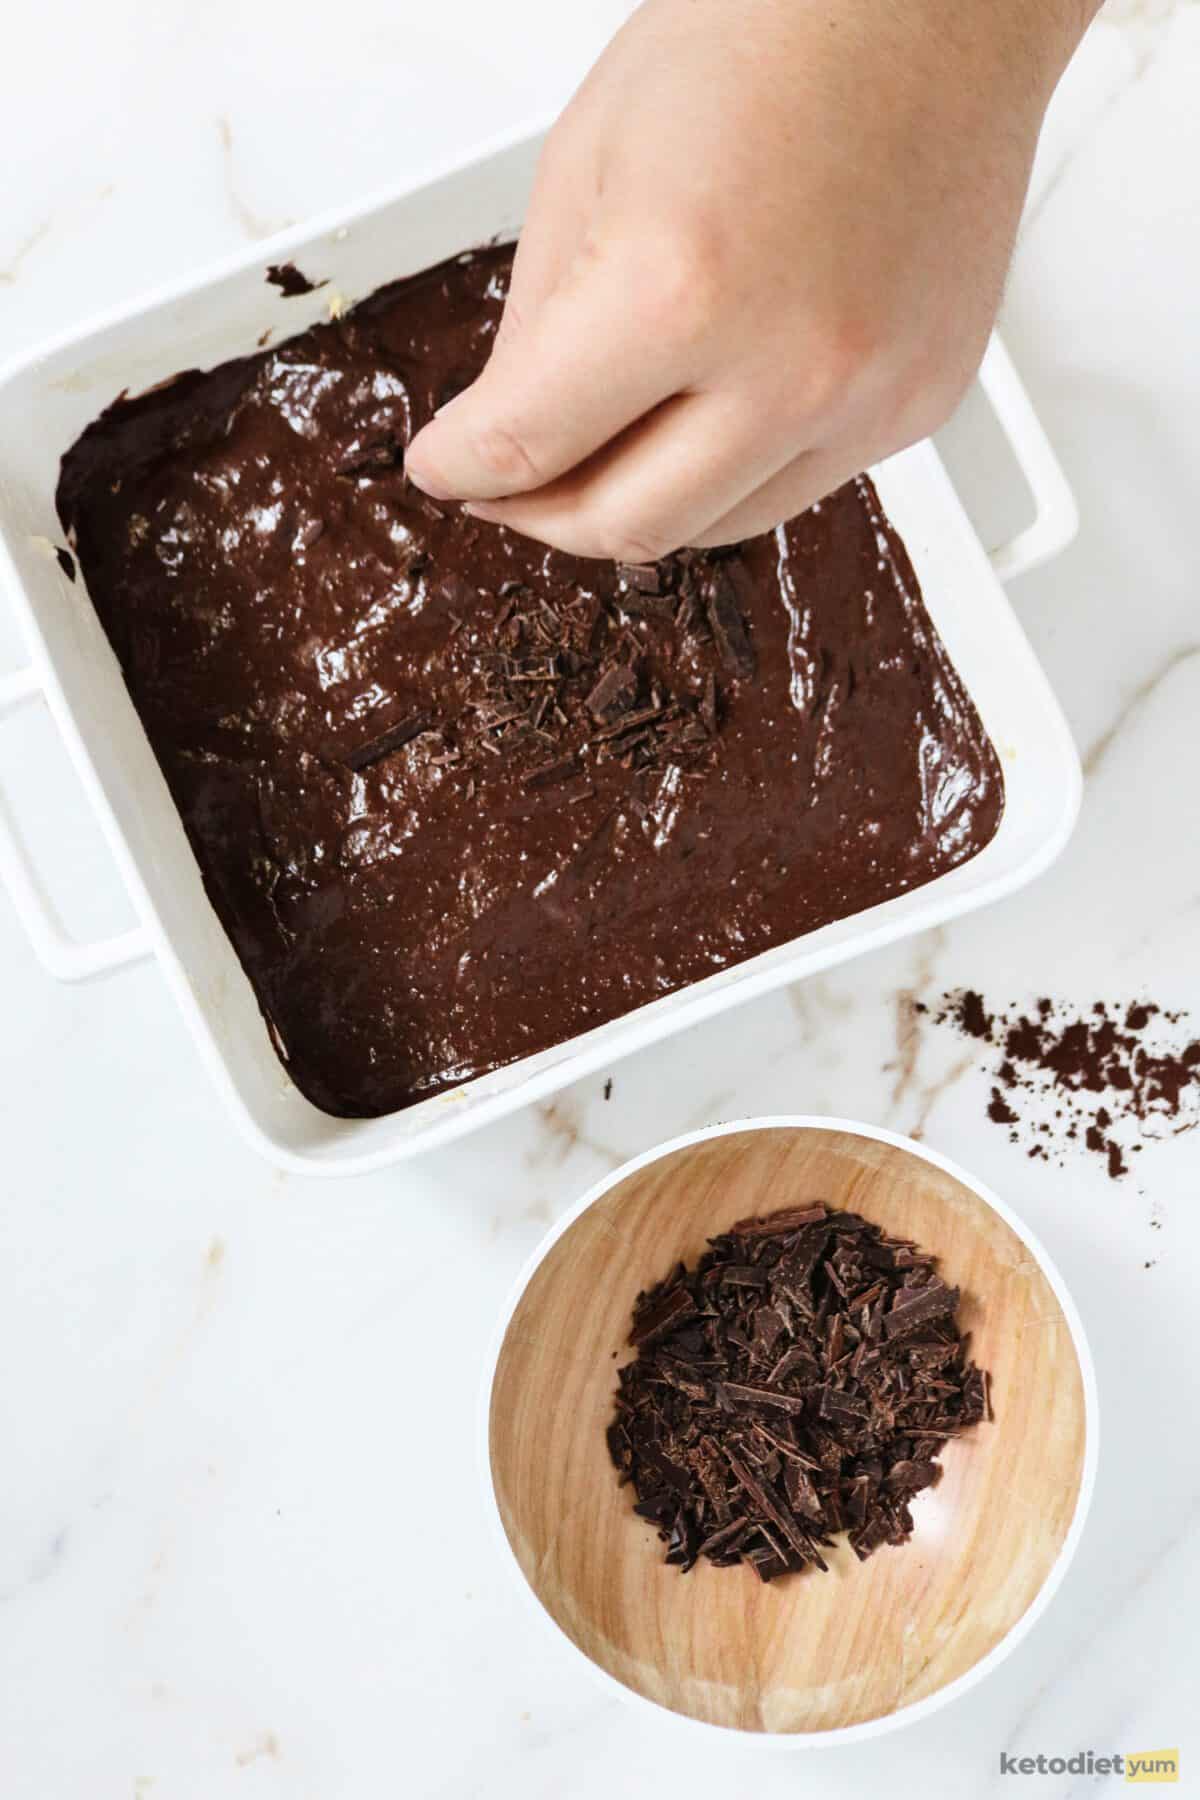 Baking pan with brownie batter with a hand sprinkling chocolate over the top and a small bowl of chocolate on a table